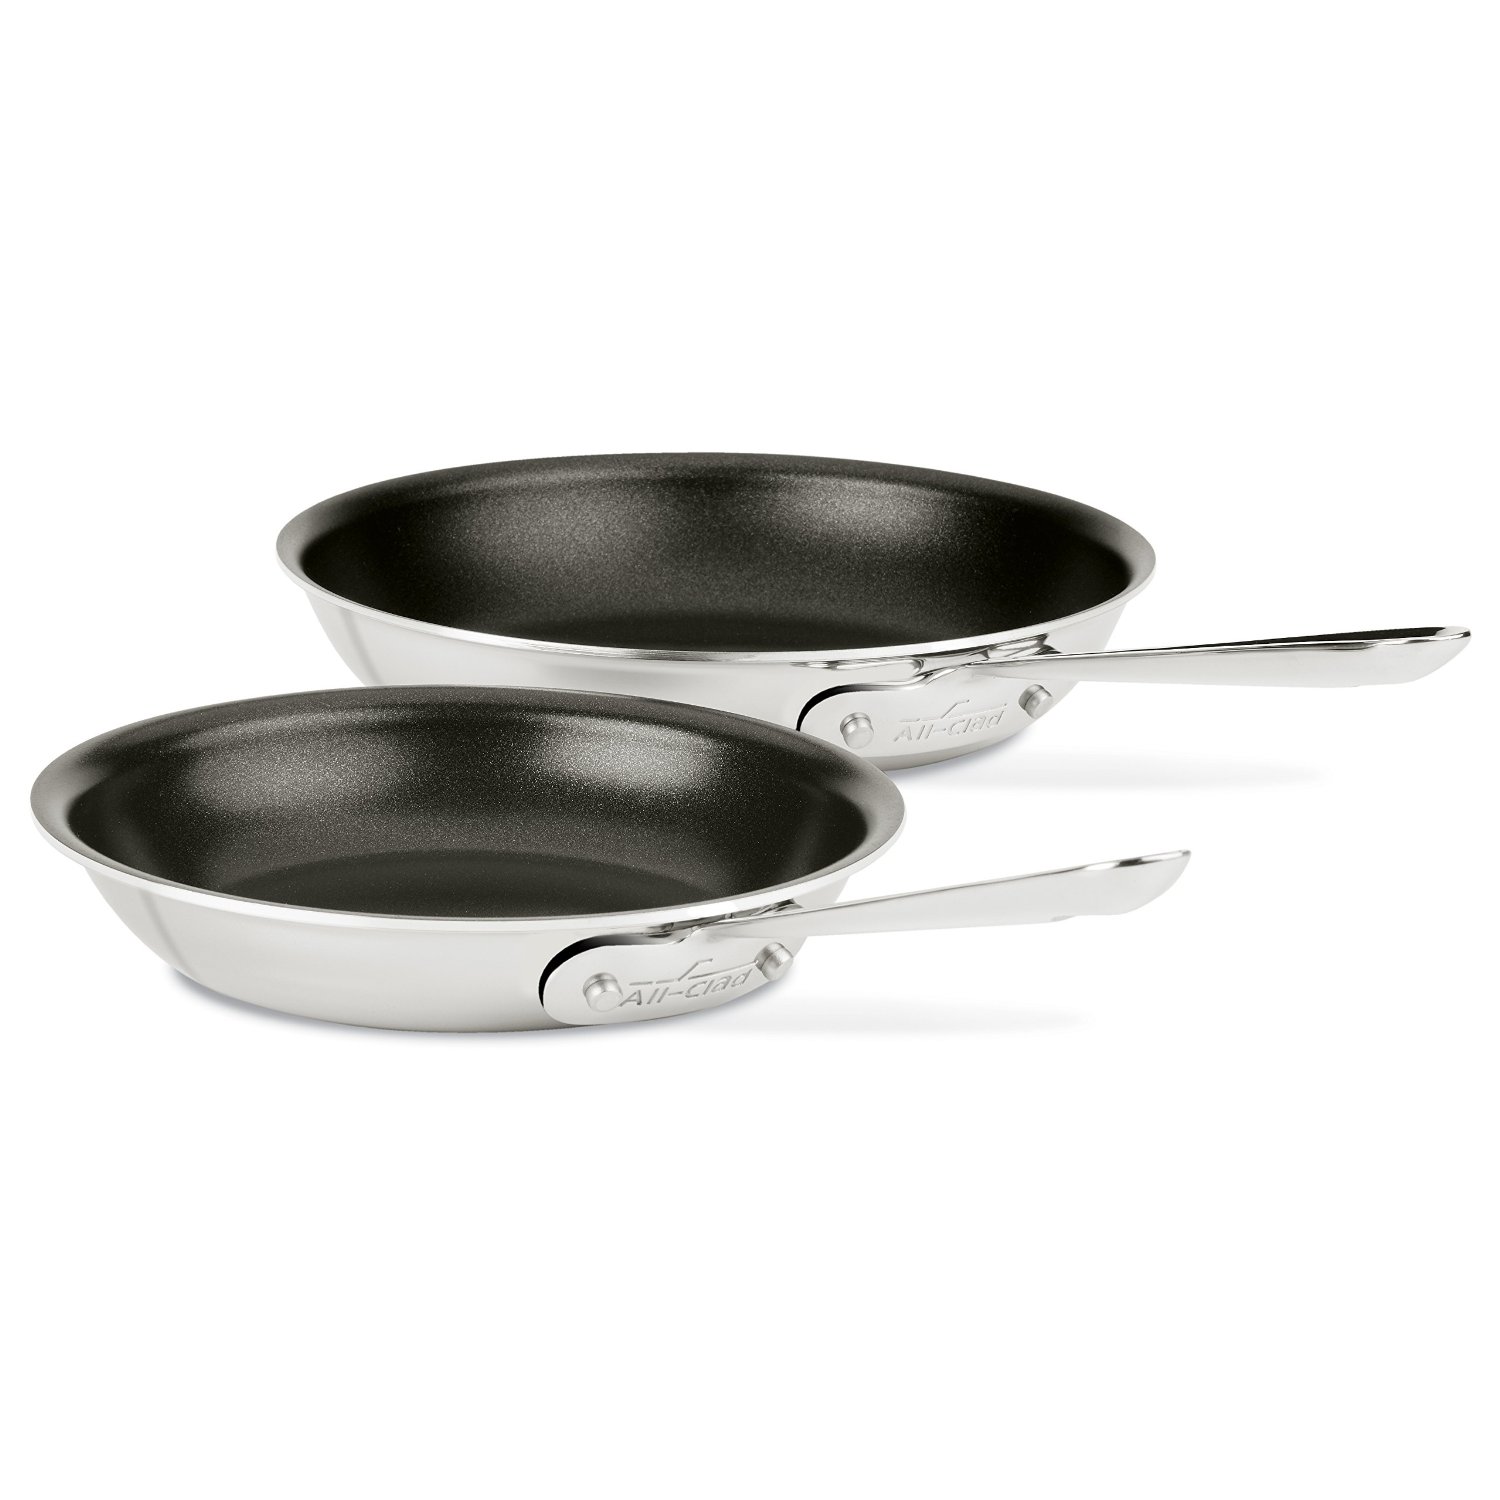 All-Clad 410810 NSR2 Stainless Steel Dishwasher Safe Oven Safe Nontick 8-Inch and 10-Inch Fry Pan Set, 2-Piece, Black